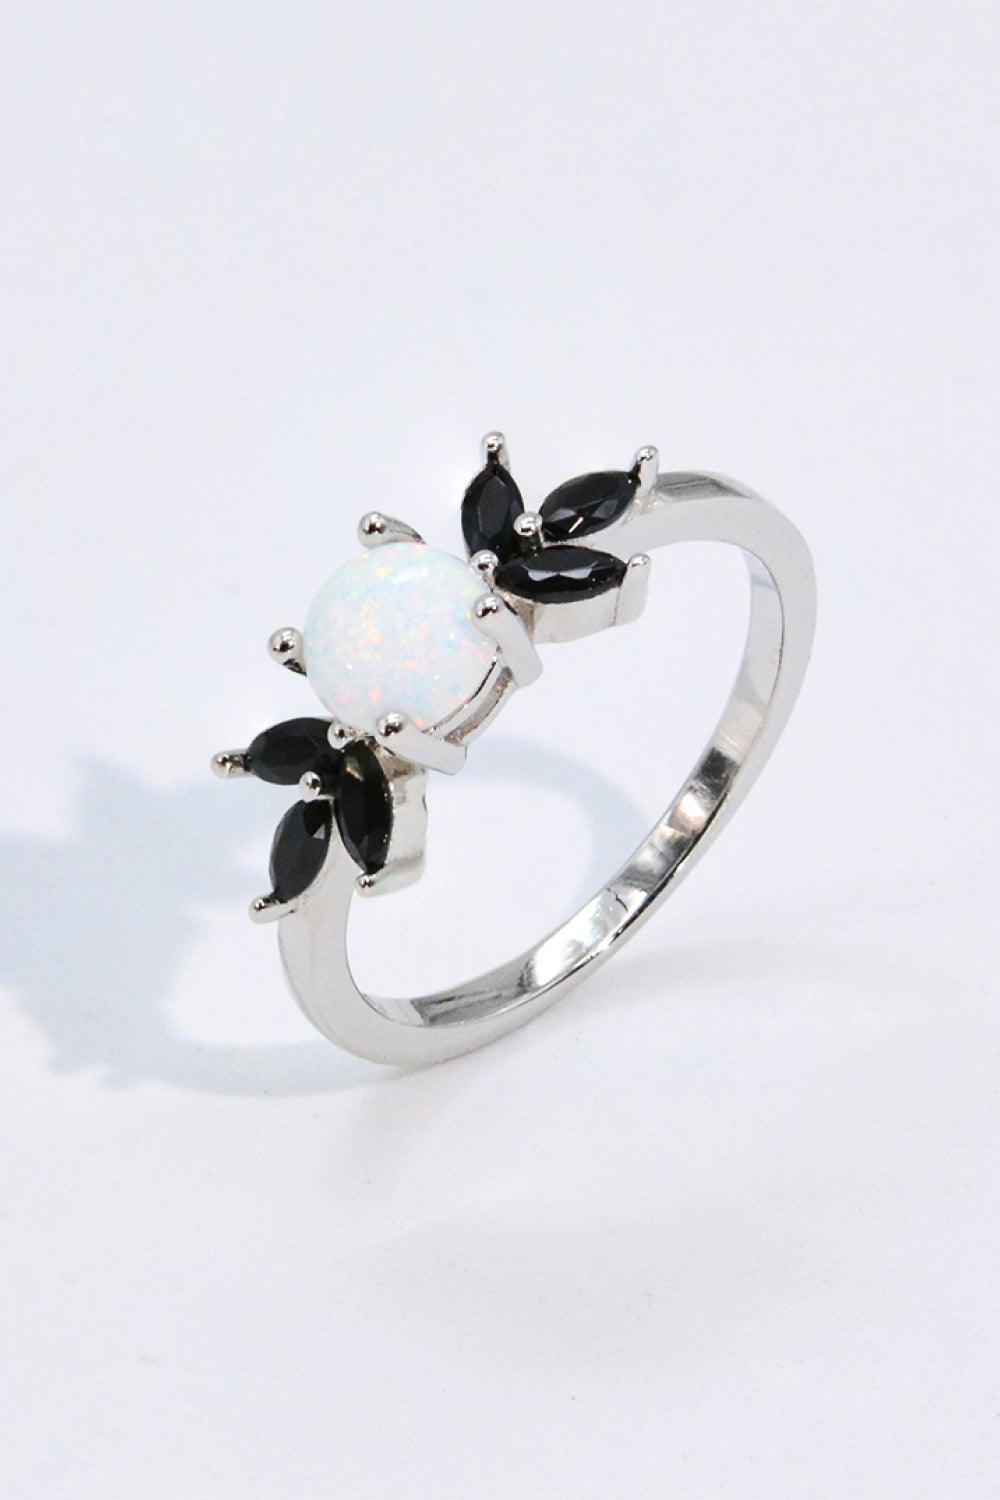 Opal and Zircon Contrast Ring Shining Symbol of Love